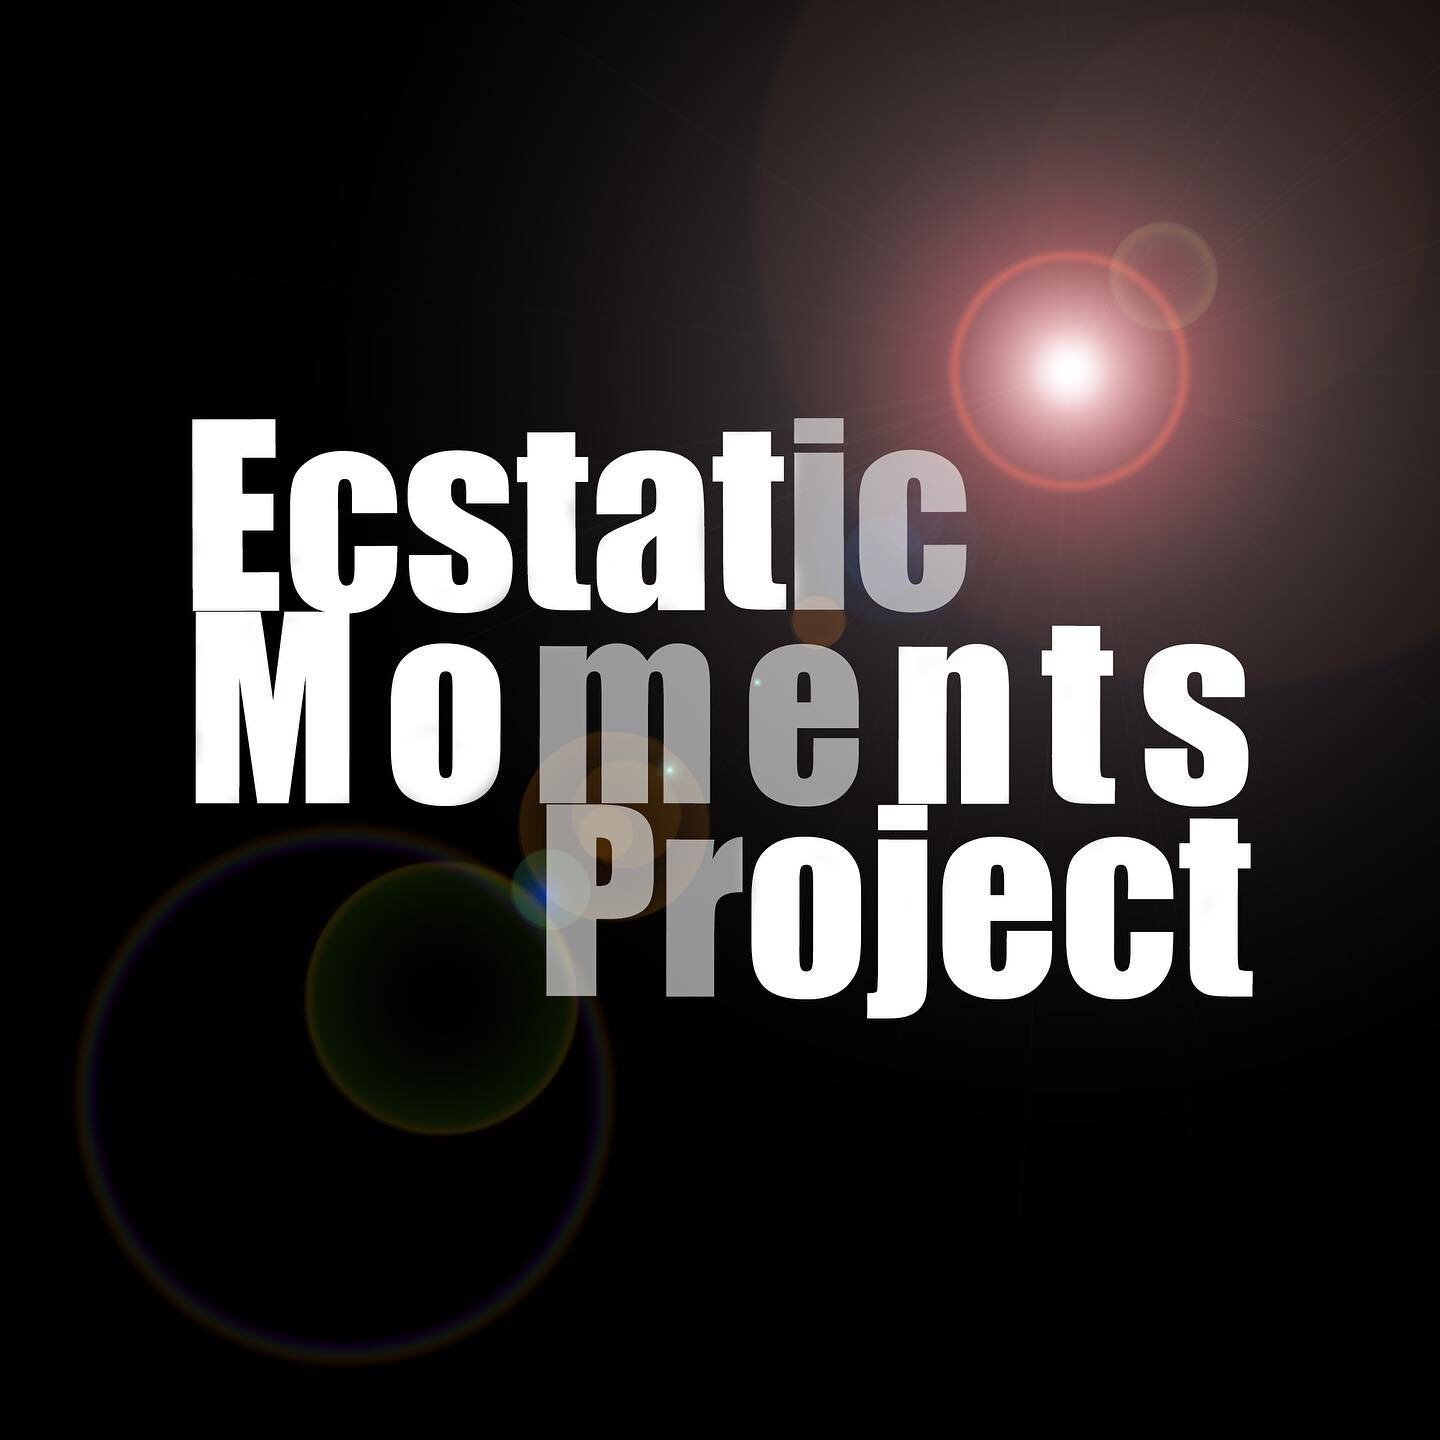 #EcstaticMomentsProject by @nairy.shahinian #NairyShahinian

#MusicAndPhotography #MusicPhotos #MusicForHumanity #MusicForThePeople
#PhotographyForHumanity #PhotographyForThePeople
#ConcertPhotos #ConcertShots #ConcertPics
#LimitedEditions #LimitedEd